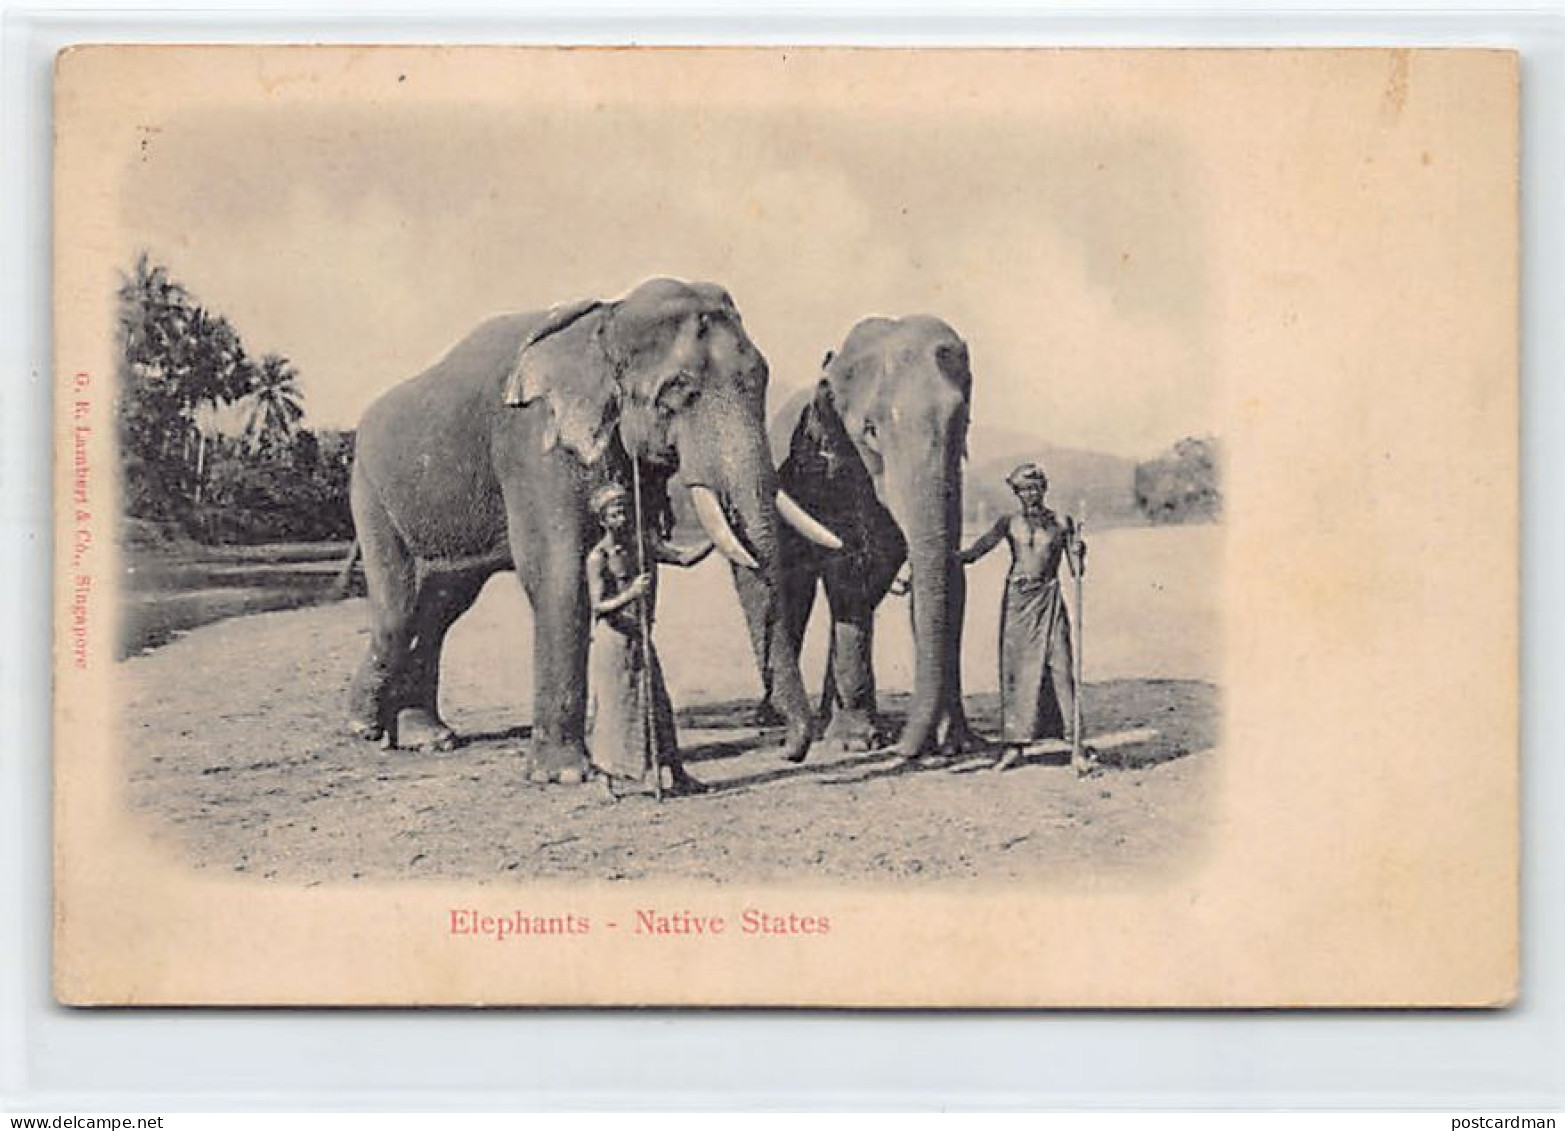 Malaysia - Elephant - Native States - RELIEF POSTCARD - Publ. G. R. Lambert & Co.  - Malaysia